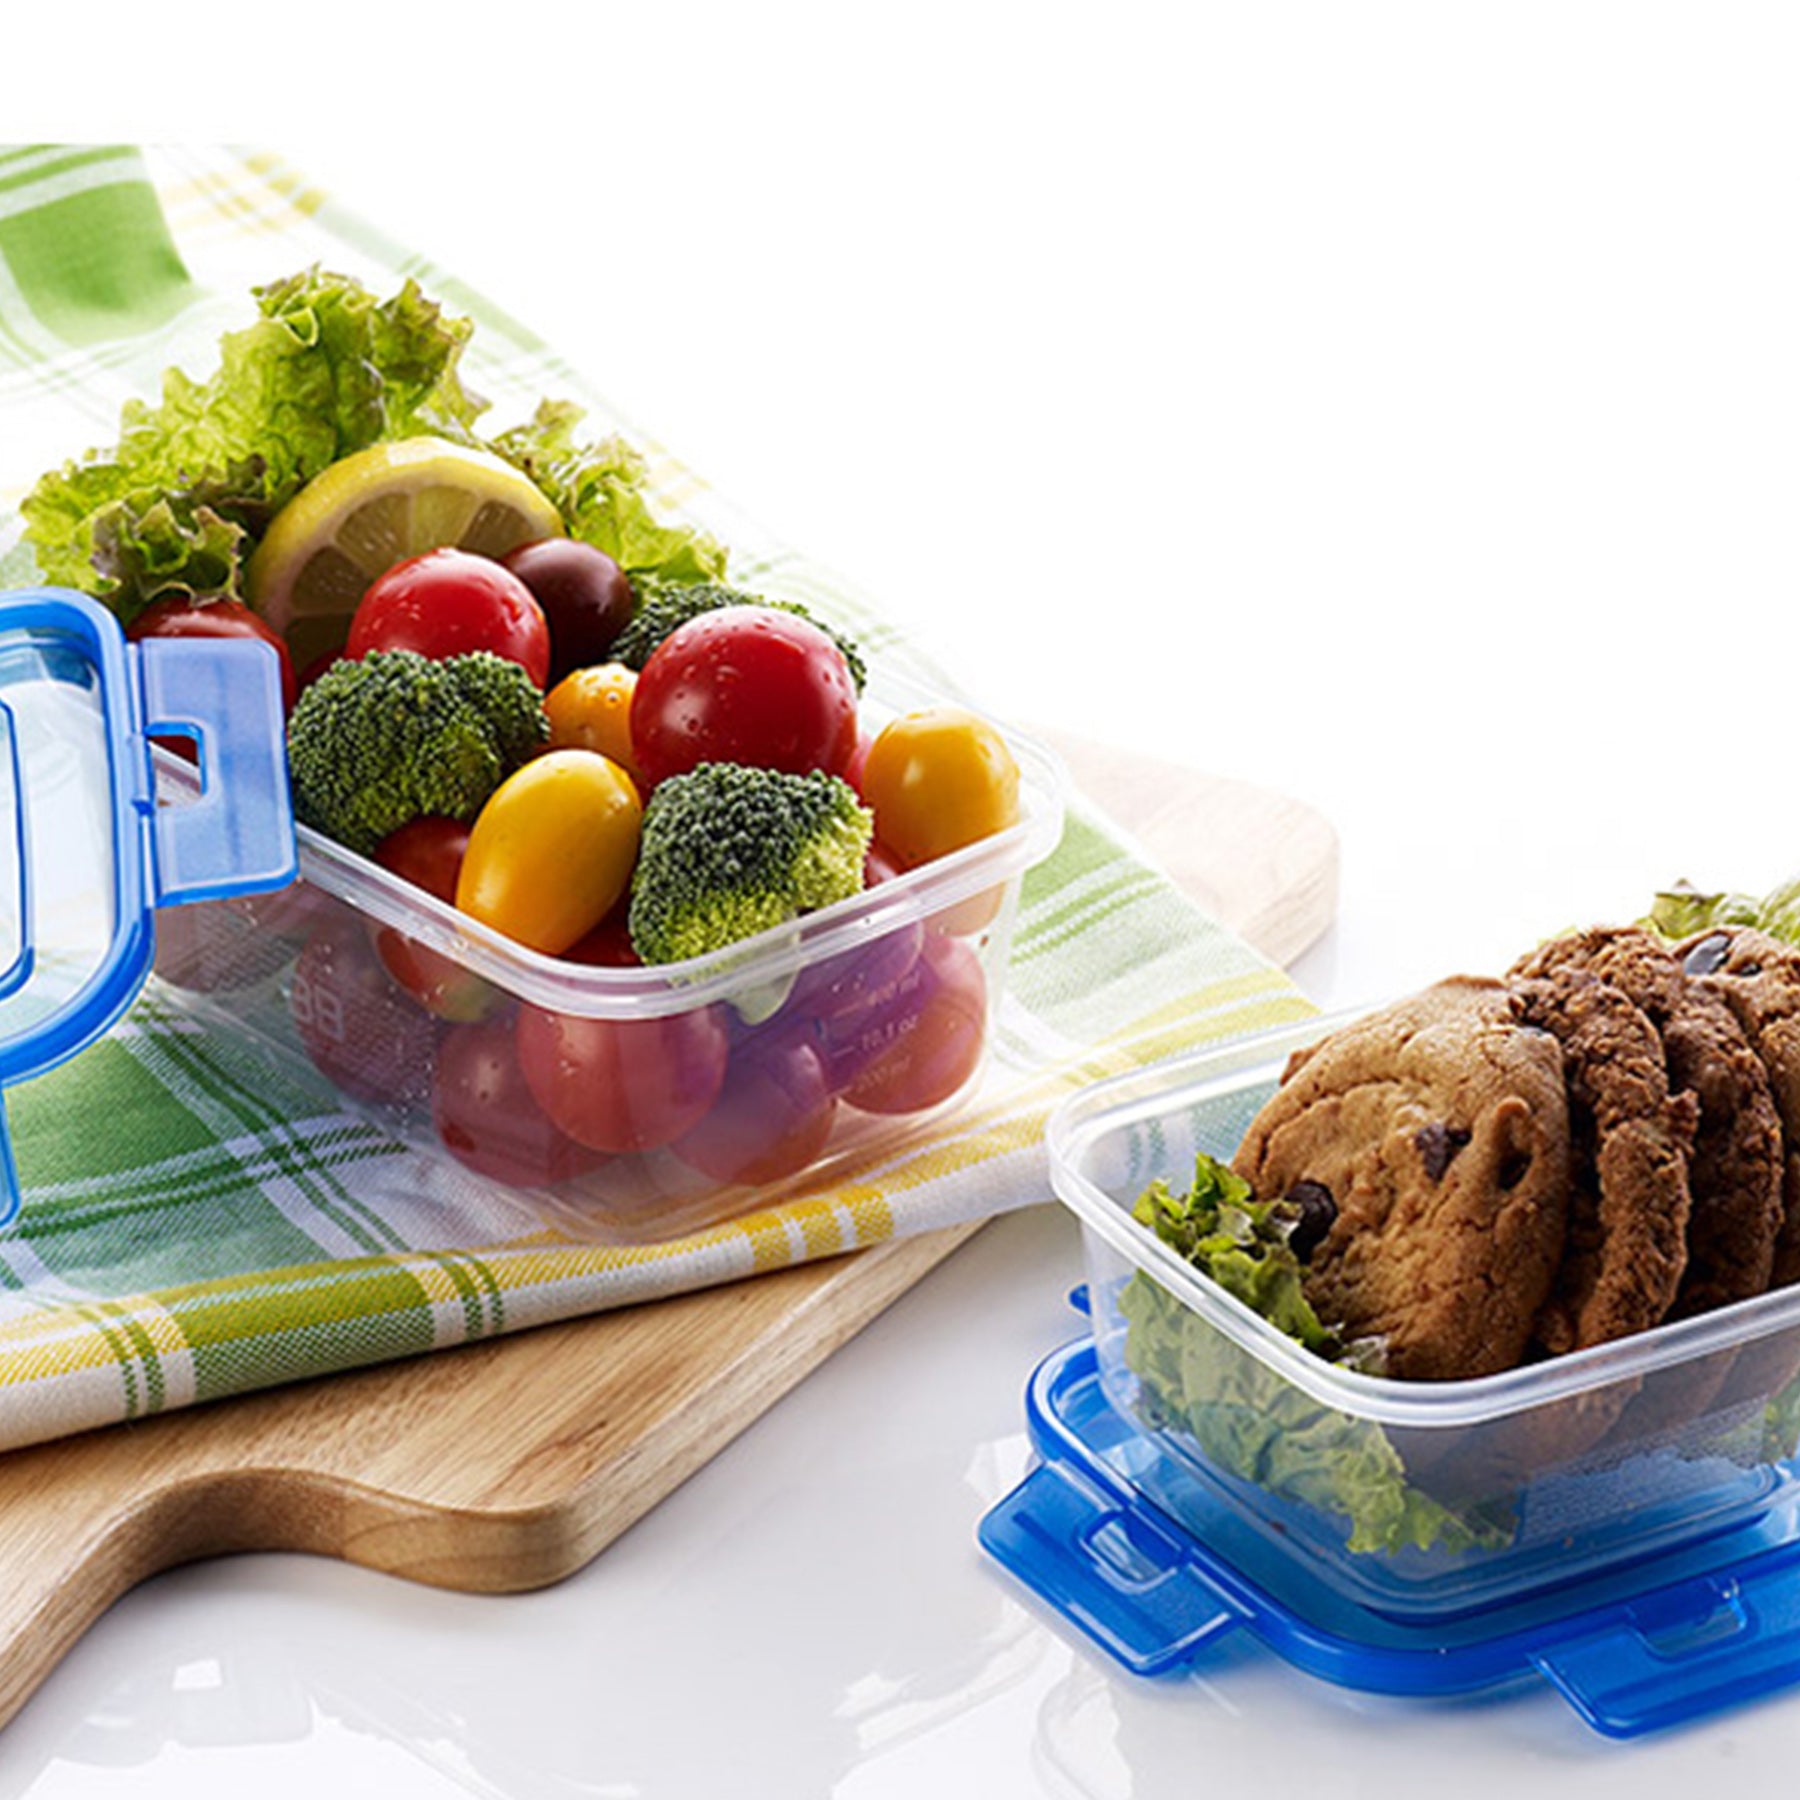 Plastic containers set - Blue & Clear